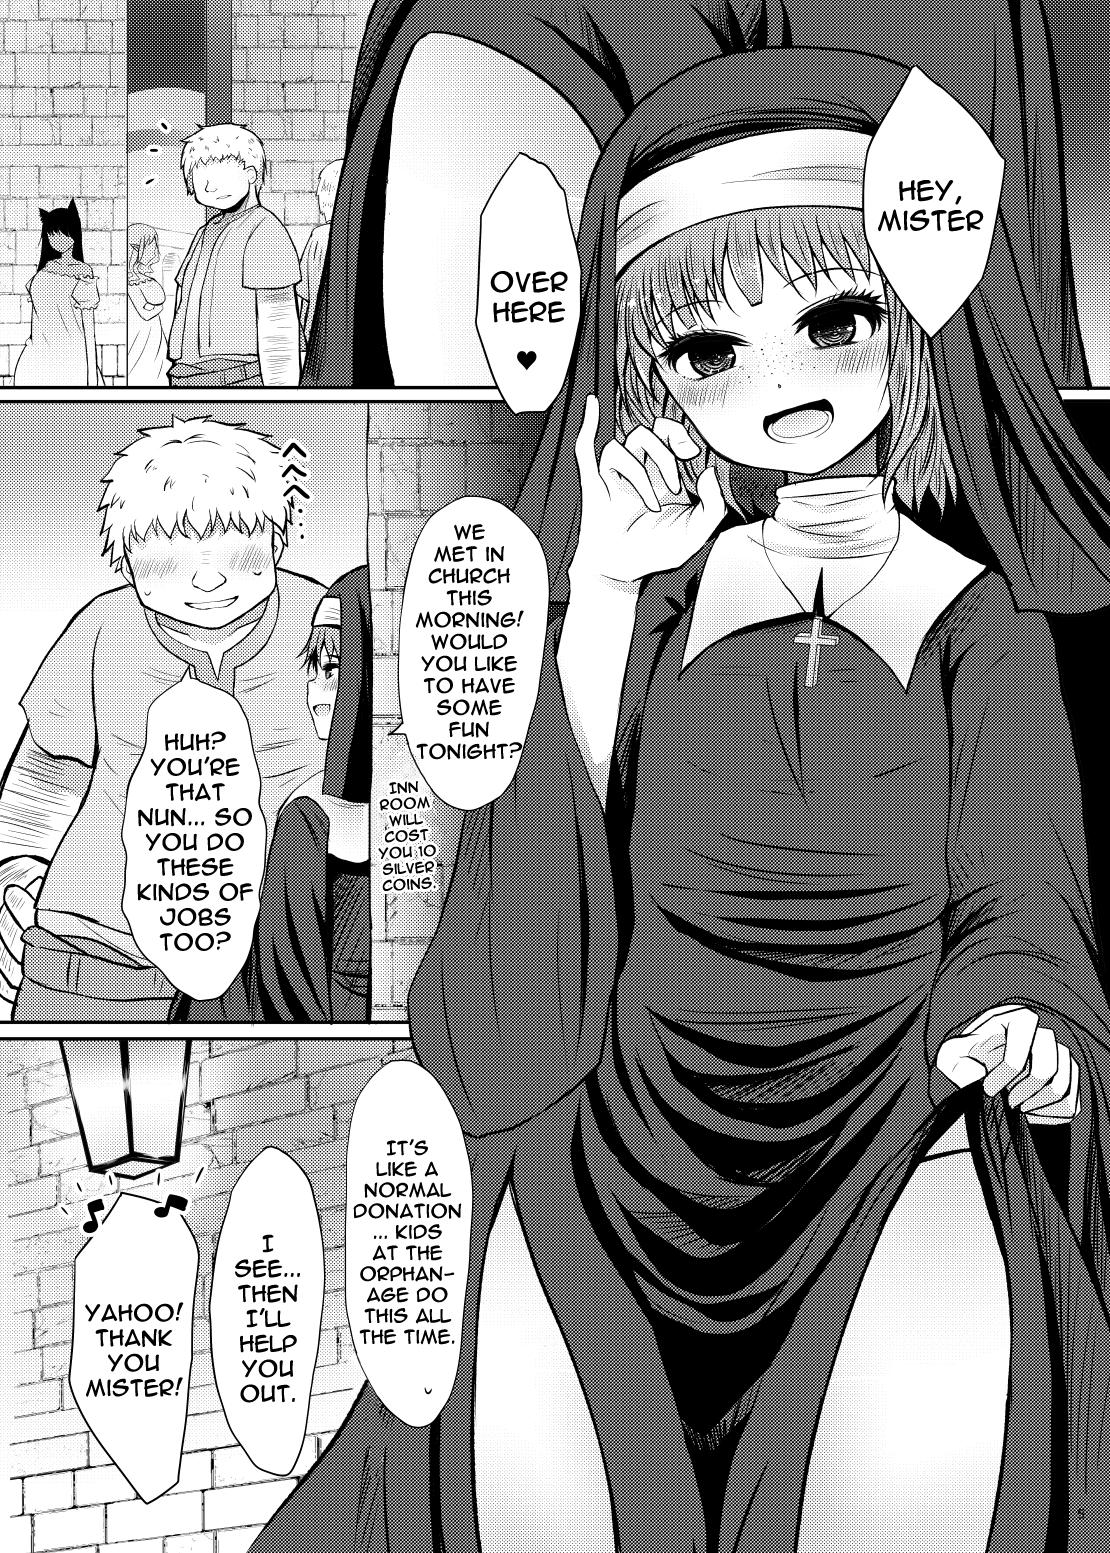 Small Tits Shouginka 10-mai Yadodai Betsu | Paying For Something a Little Extra To Go With The 10 Silver Hotel Room - Original Sex Massage - Page 4